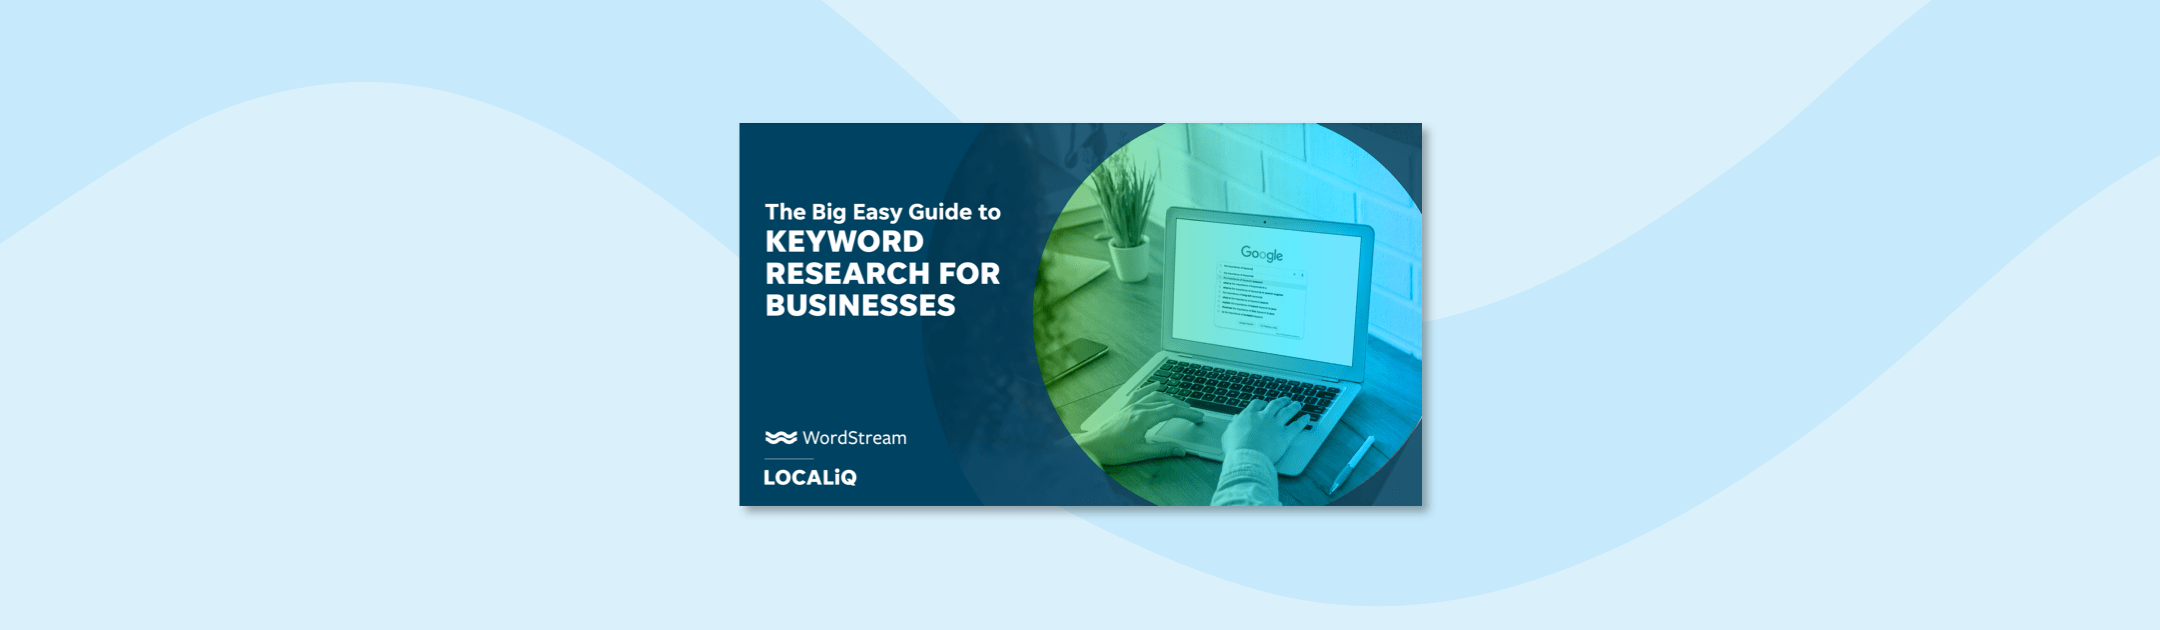 The Big, Easy Guide to Keyword Research for Businesses